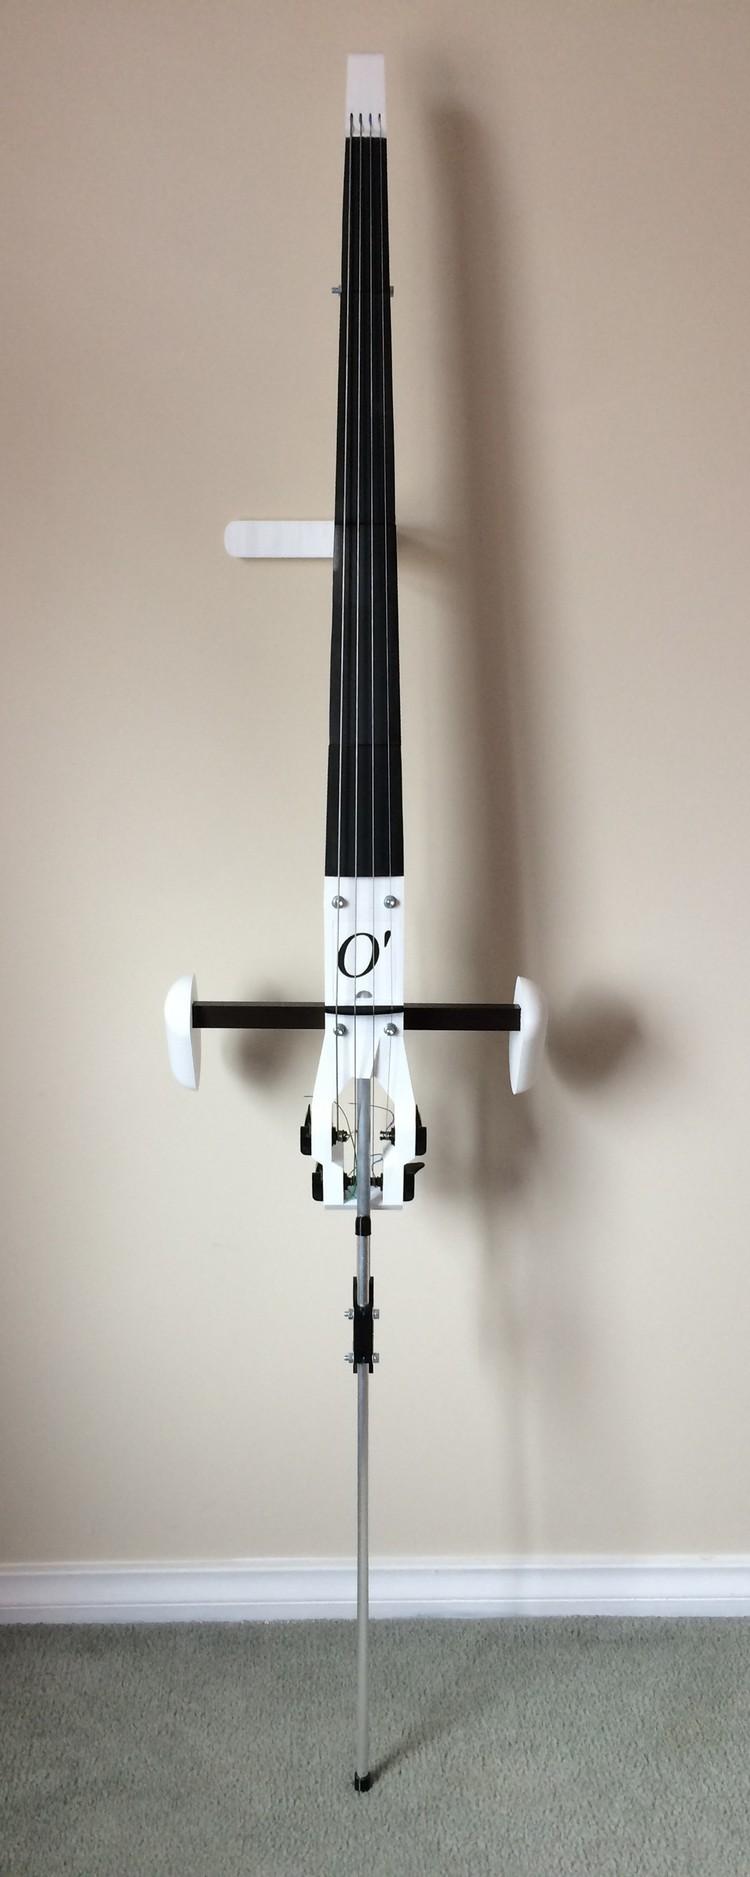 The O'Cello is a 3D-printable cello developed by Conor O'Kane, which is free to download and print for personal use. This document will show you how to print and assemble your own O'Cello.